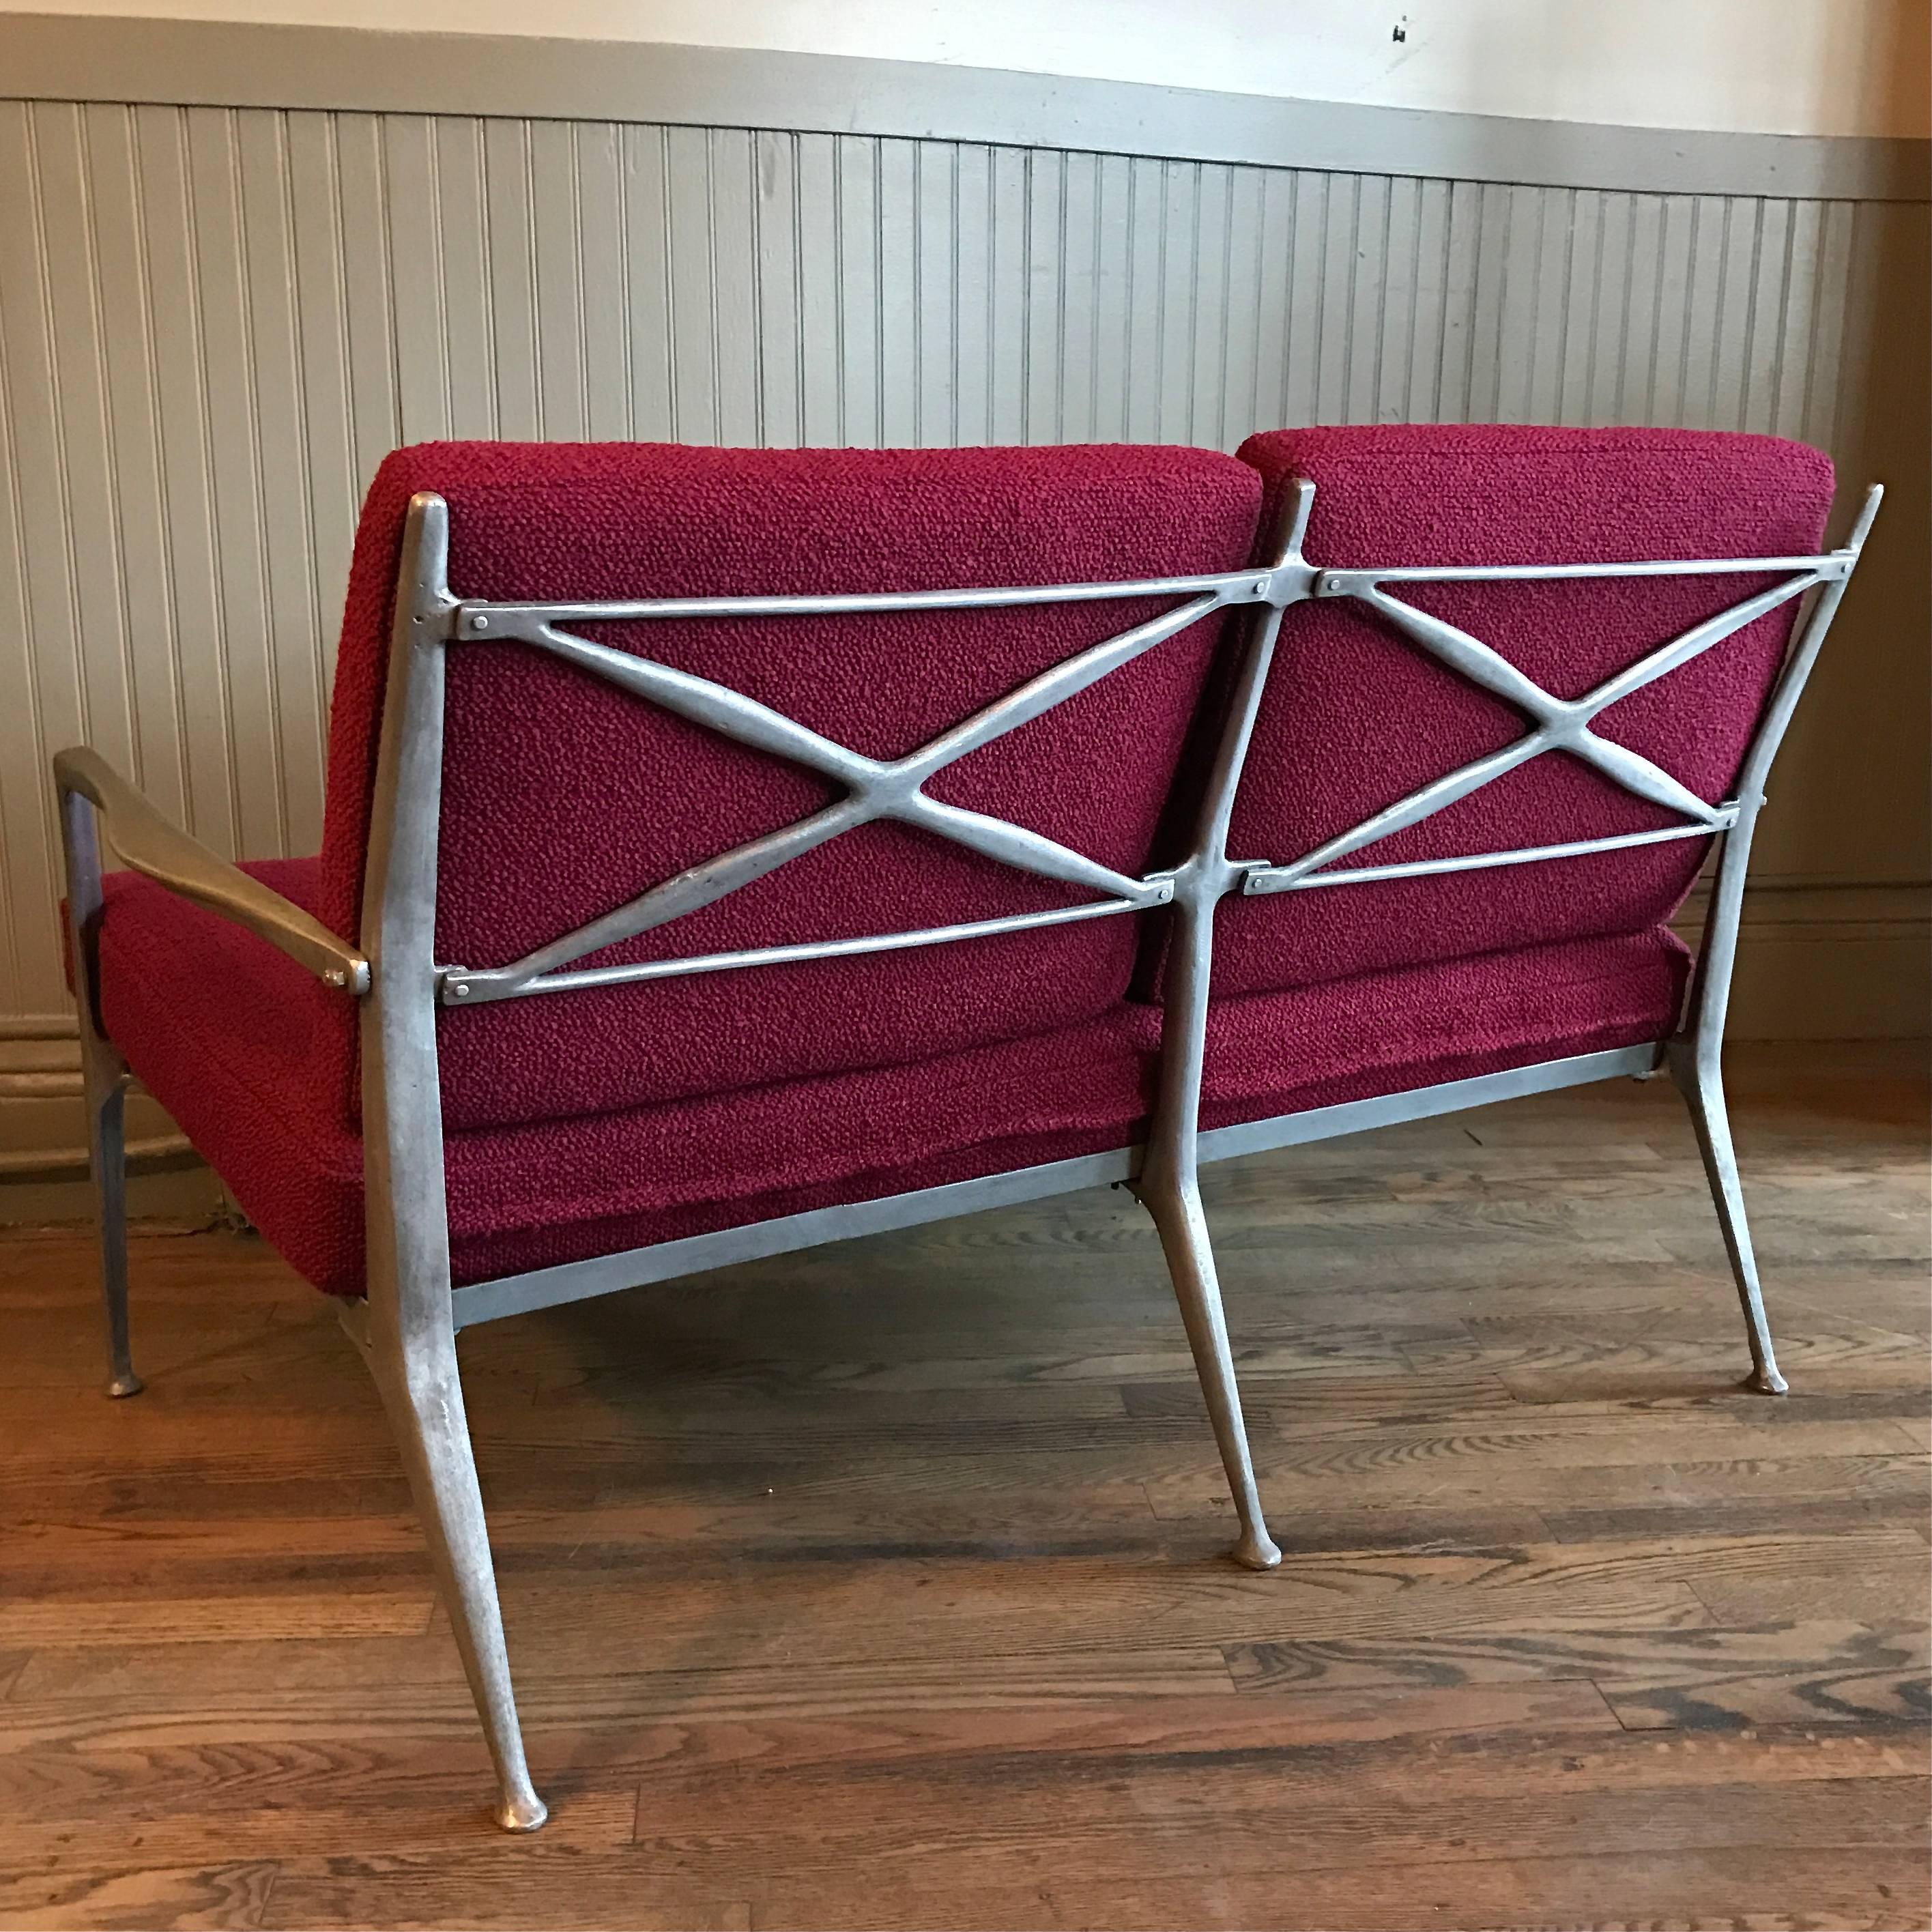 Rare and unusual, organically molded, steel frame, loveseat with newly upholstered cushions in a contrasting, deep red bouclé́. The loveseat is beautiful from all angles.